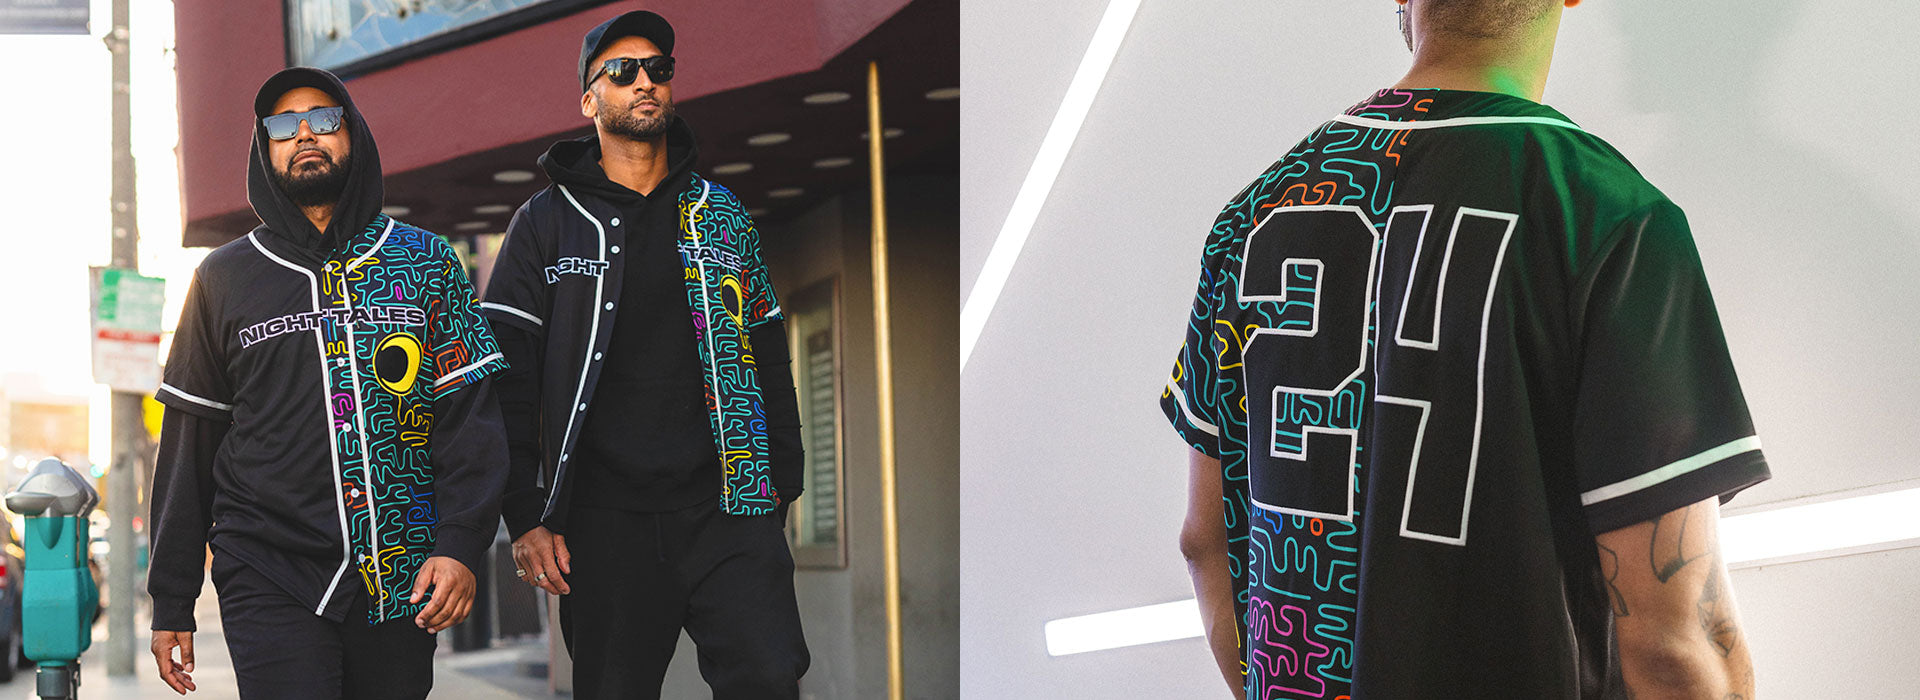 Electric Family x Night Tales: Baseball Jersey Release